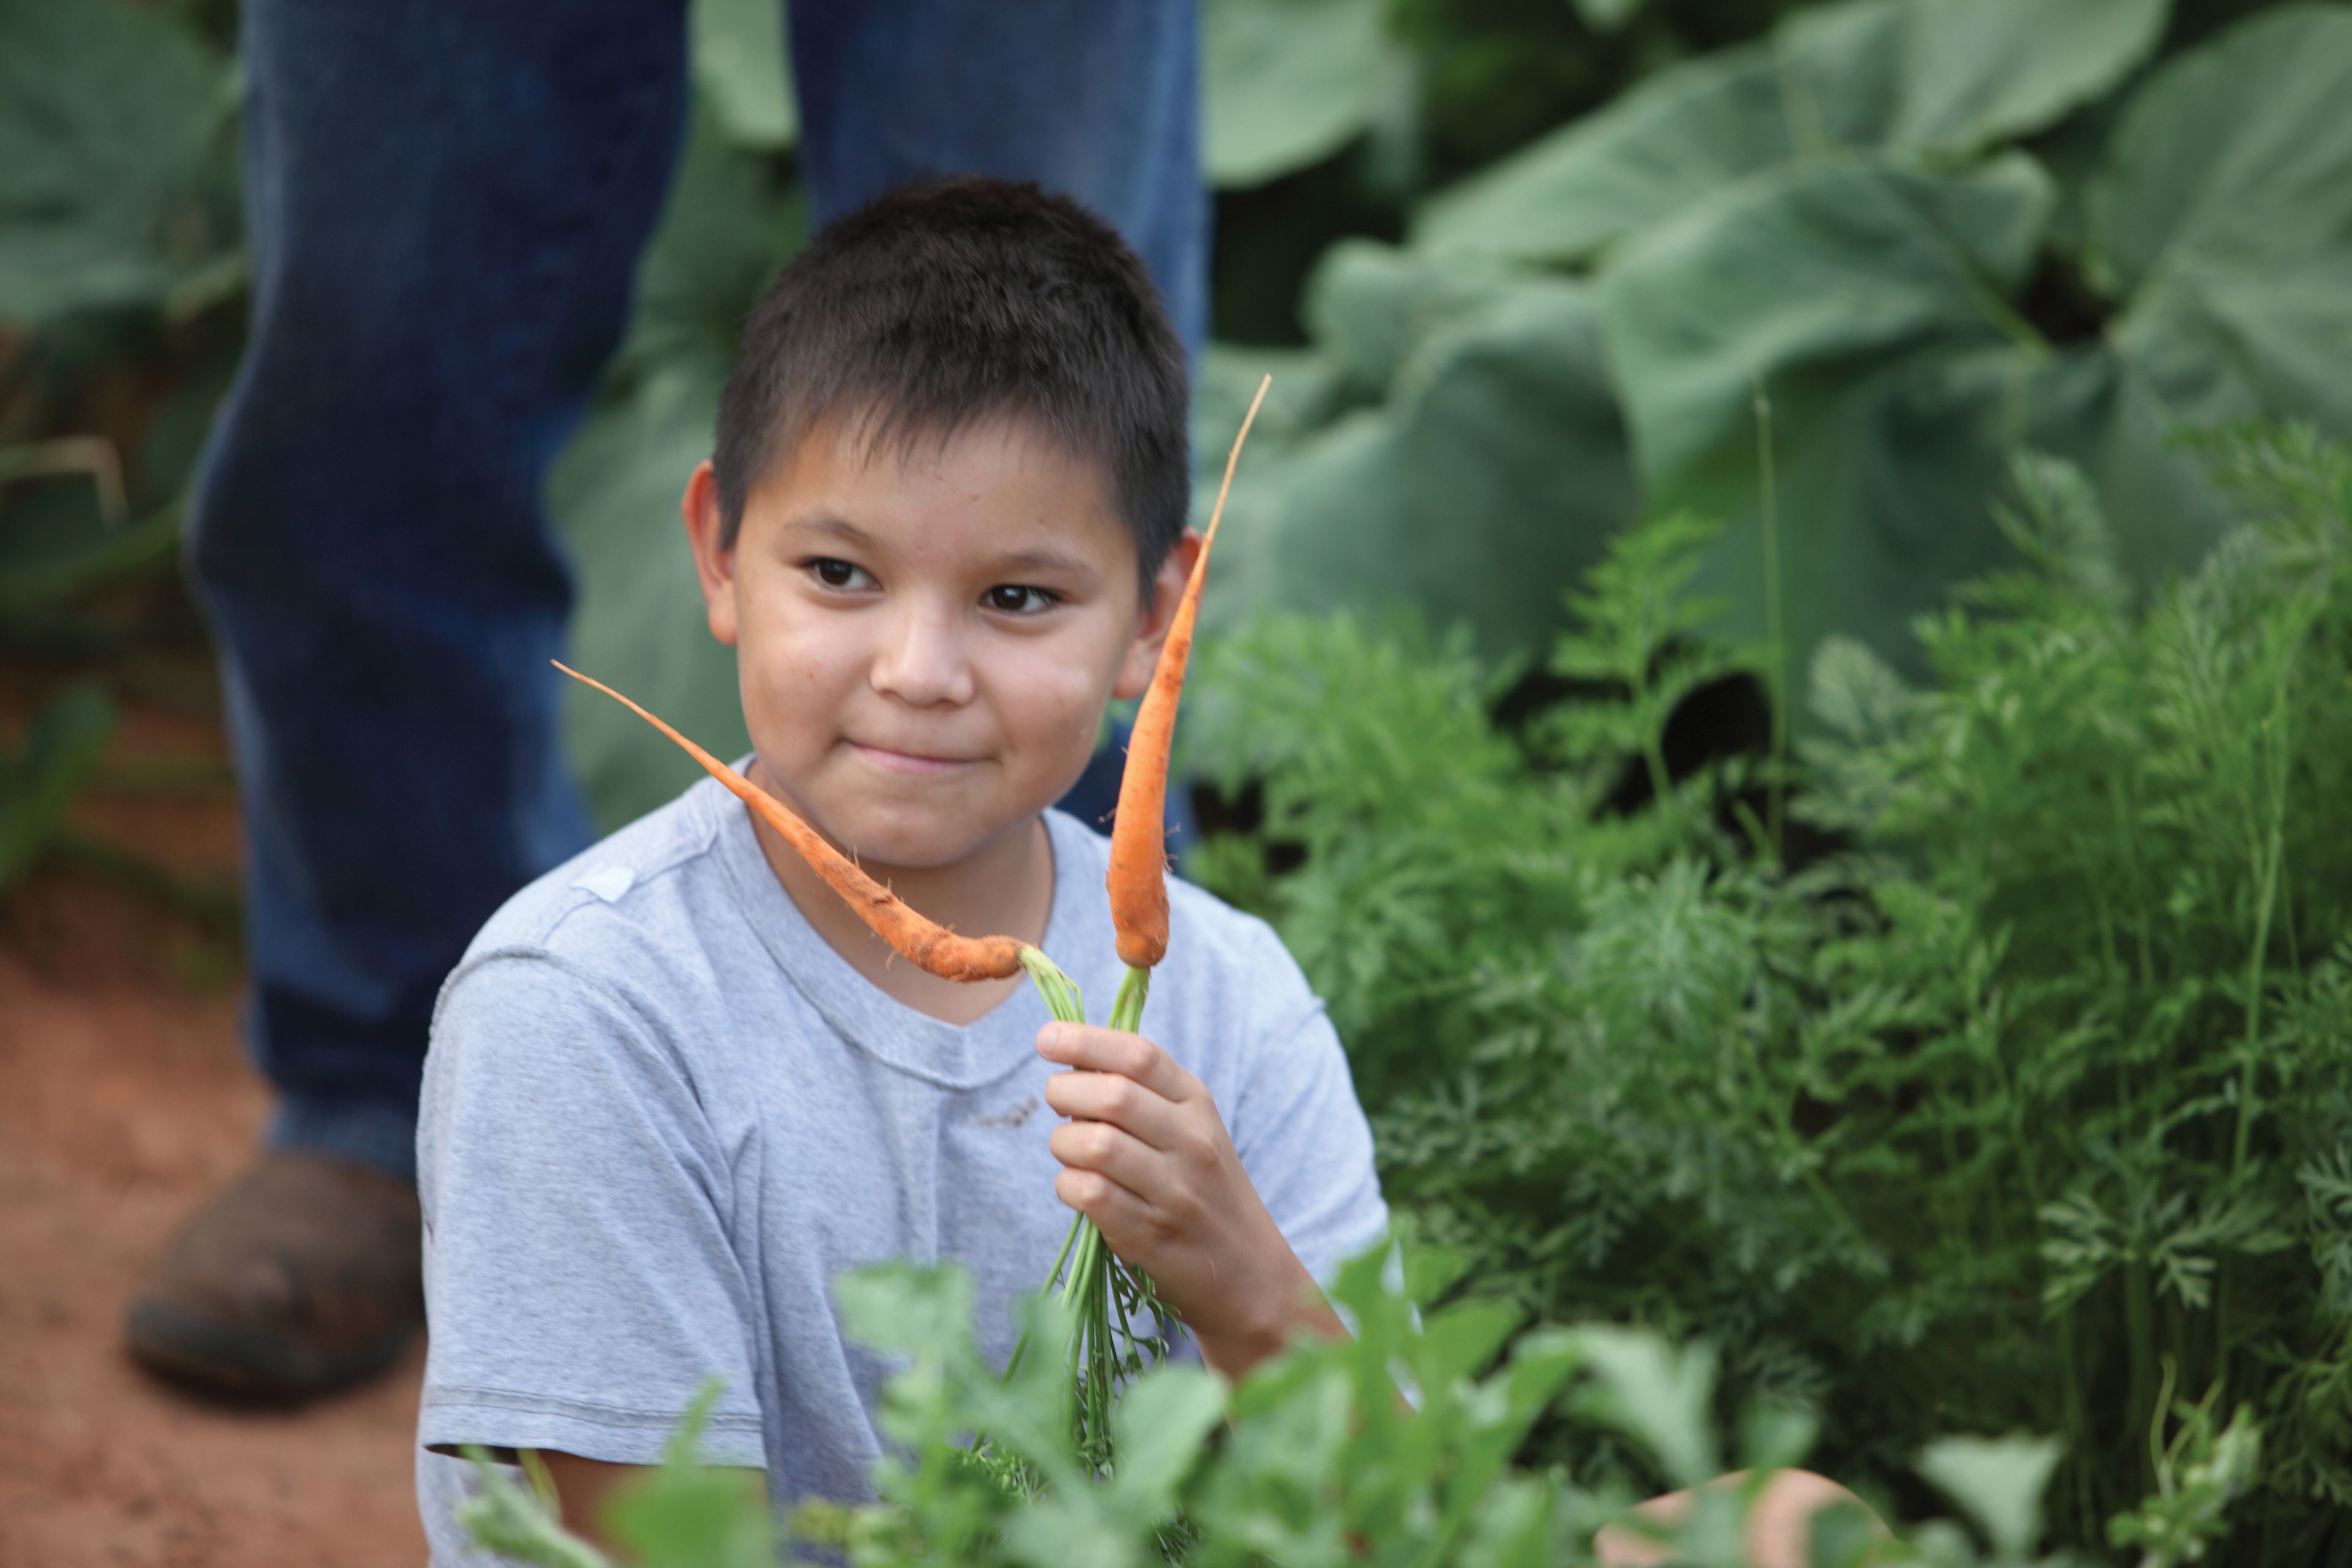 A young boy holds two orange carrots from a garden.